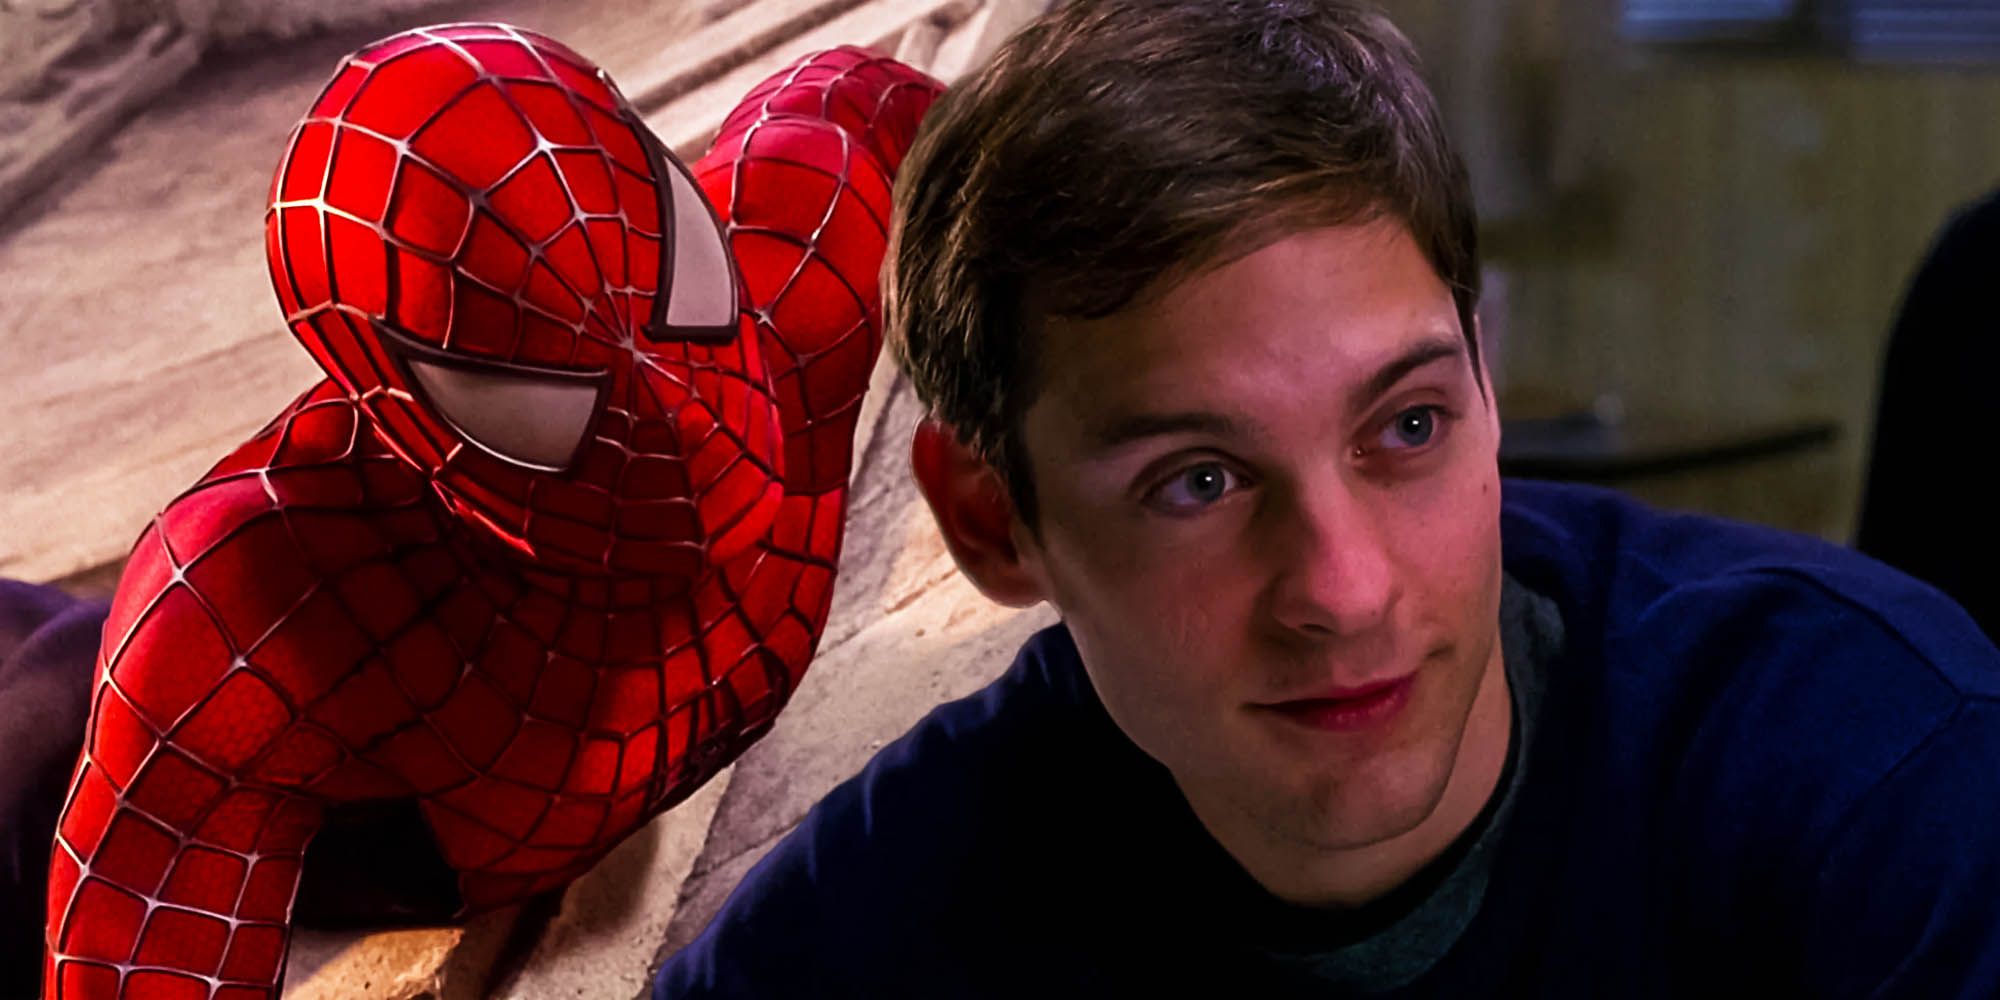 Tobey Maguire's Spider-Man return would be a big mistake